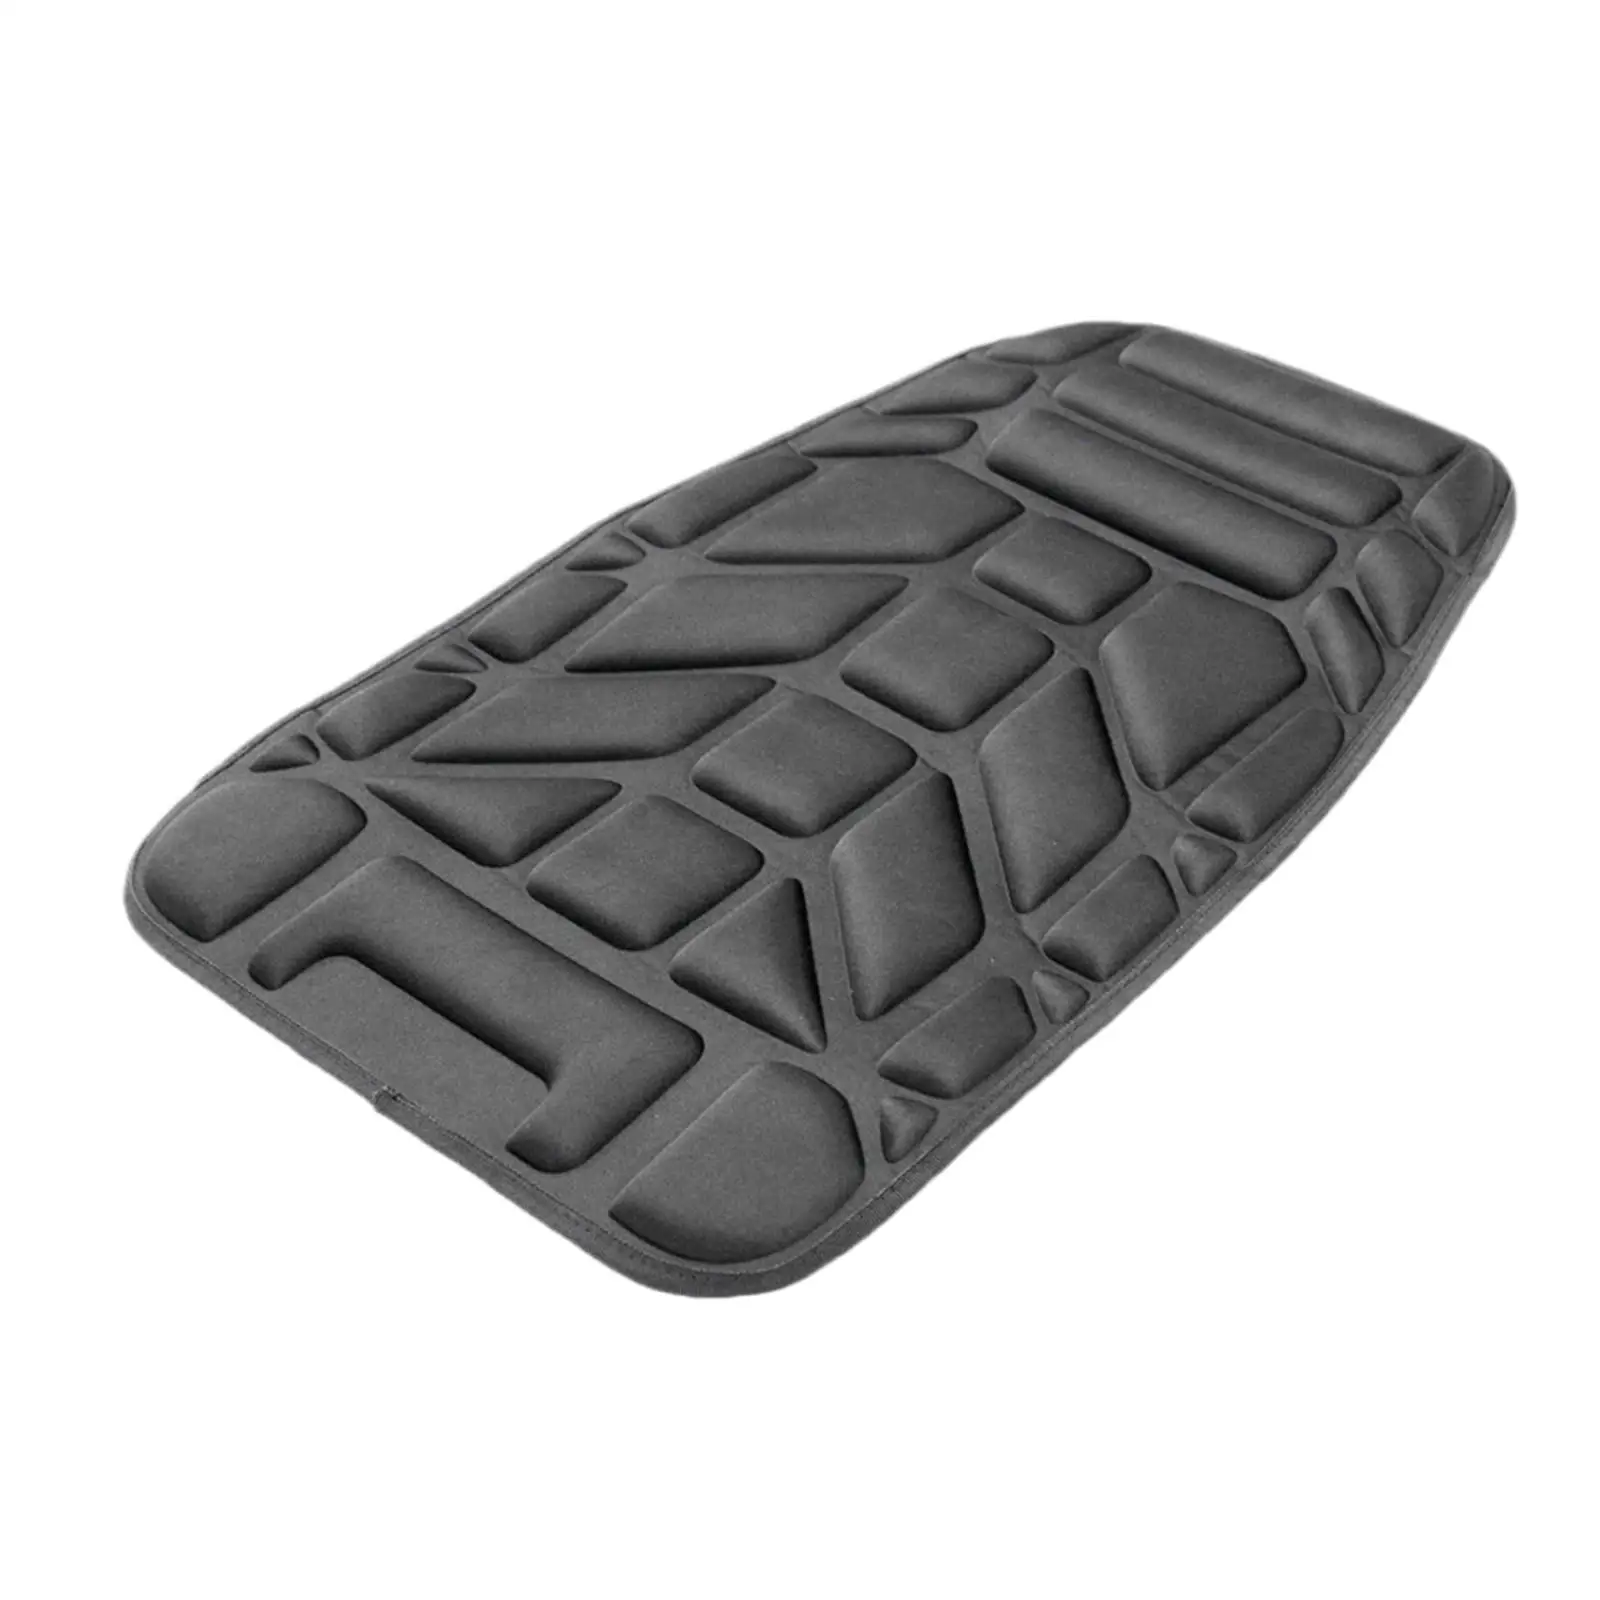 Motorcycle ATV Cushion Sunscreen Protective Adjustable Soft Shock Absorption Seat Mat 3D Pad Fit for ATV Vehicle Street Bikes